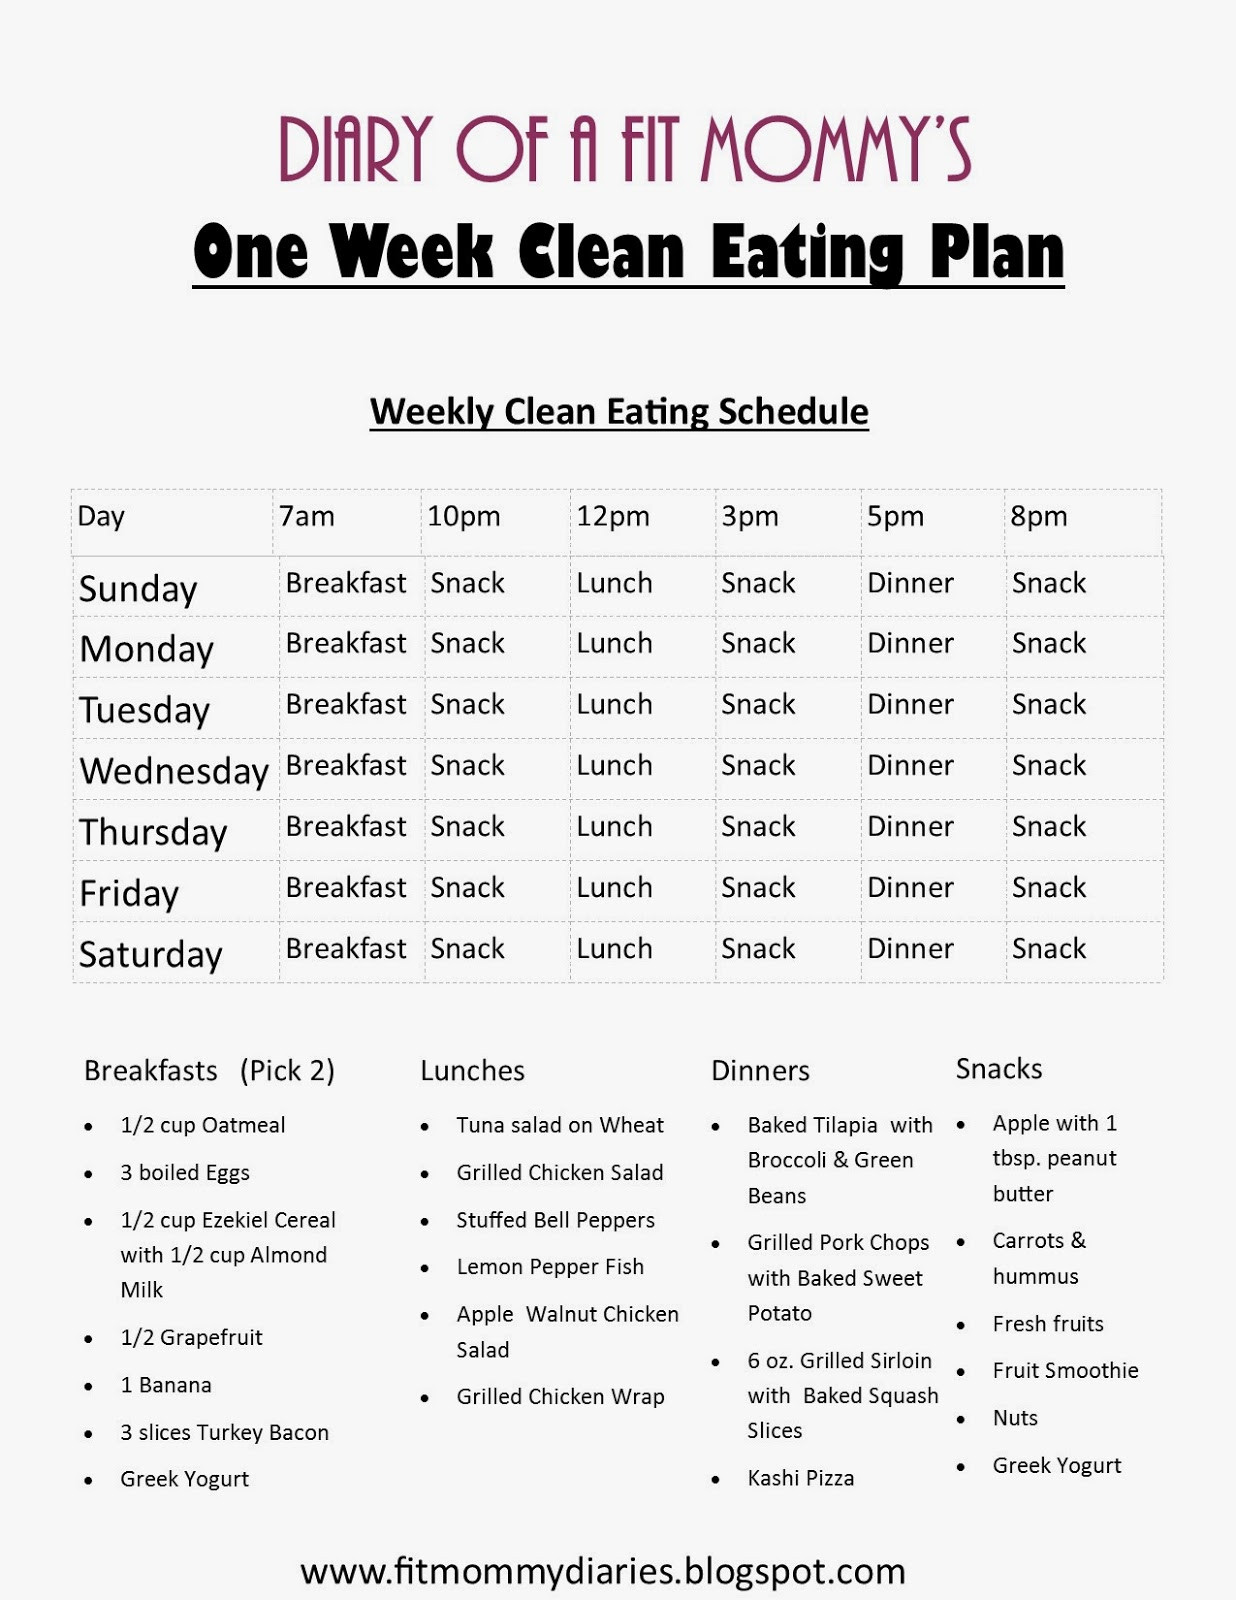 Clean Eating Diet Plan
 Diary of a Fit Mommy Diary of a Fit Mommy s e Week